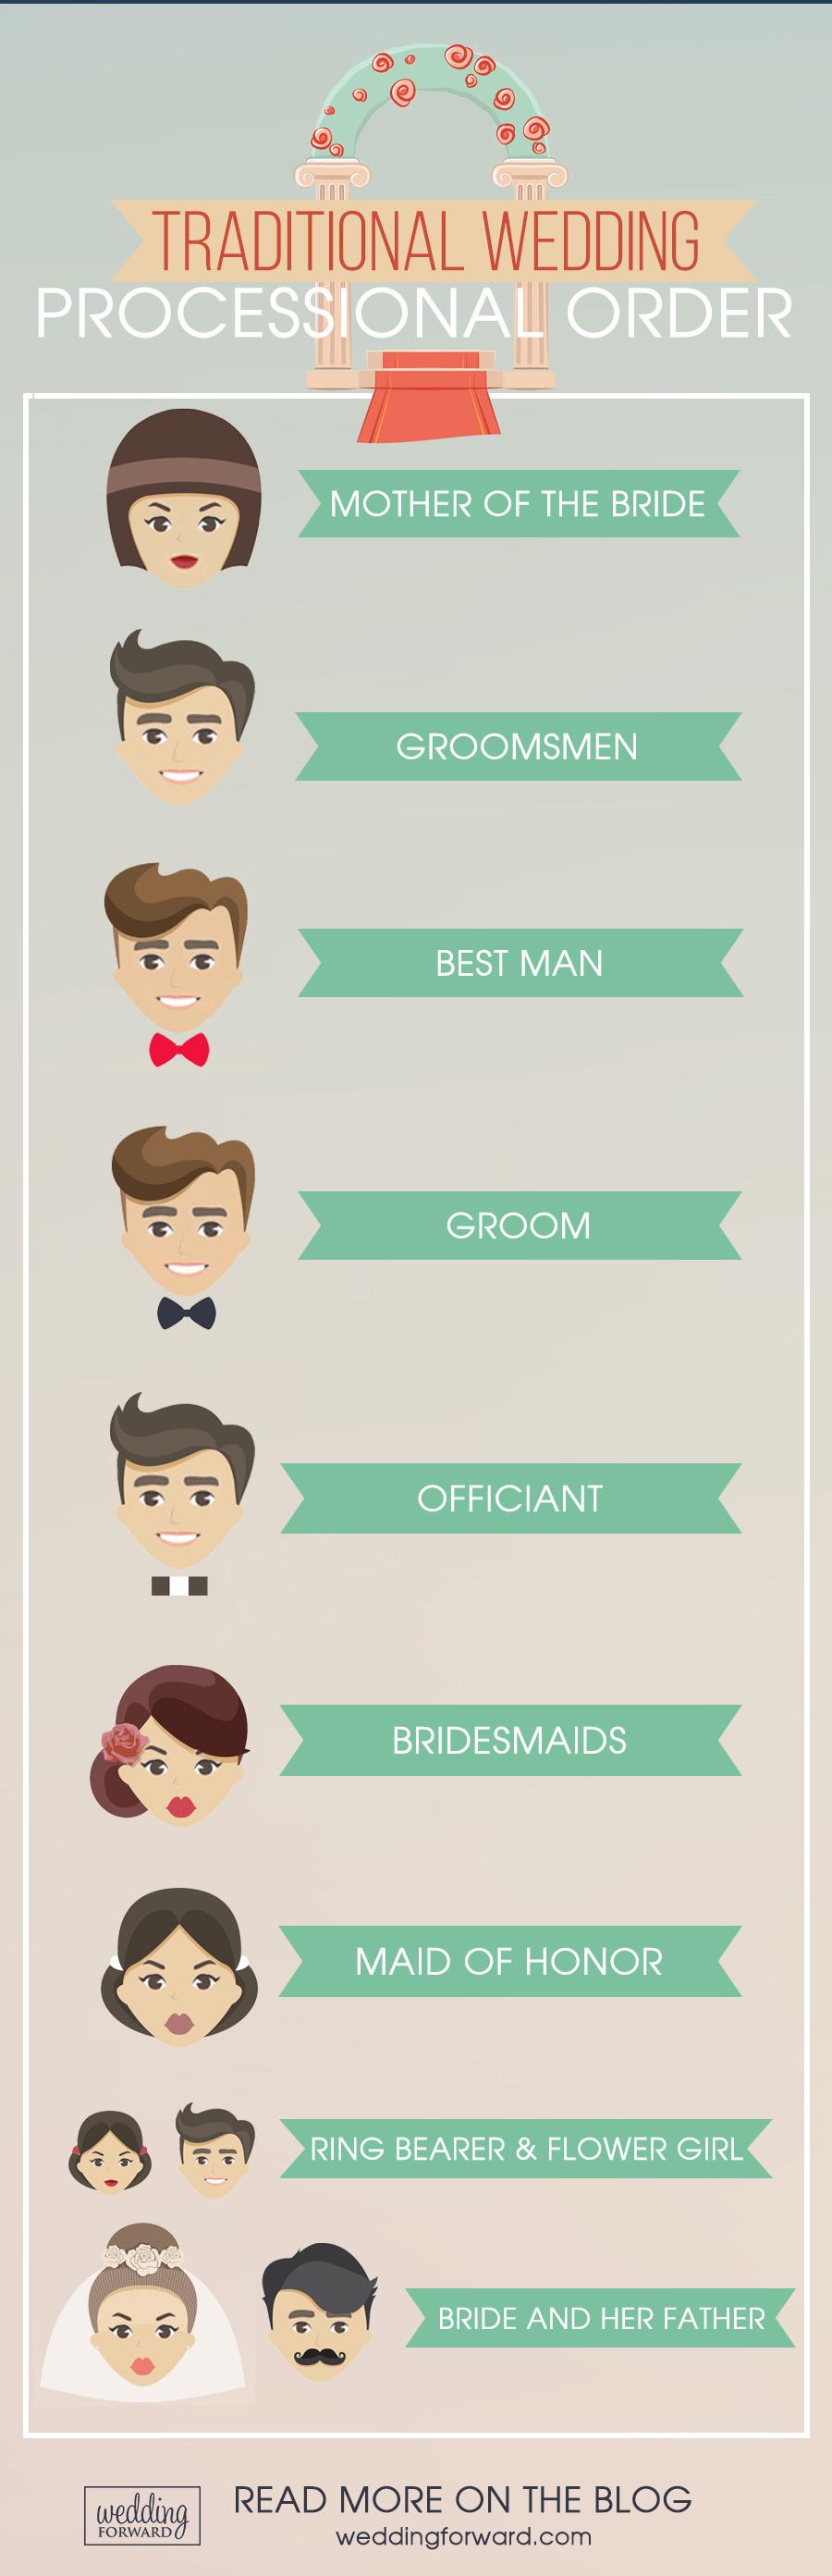 traditional wedding processional order